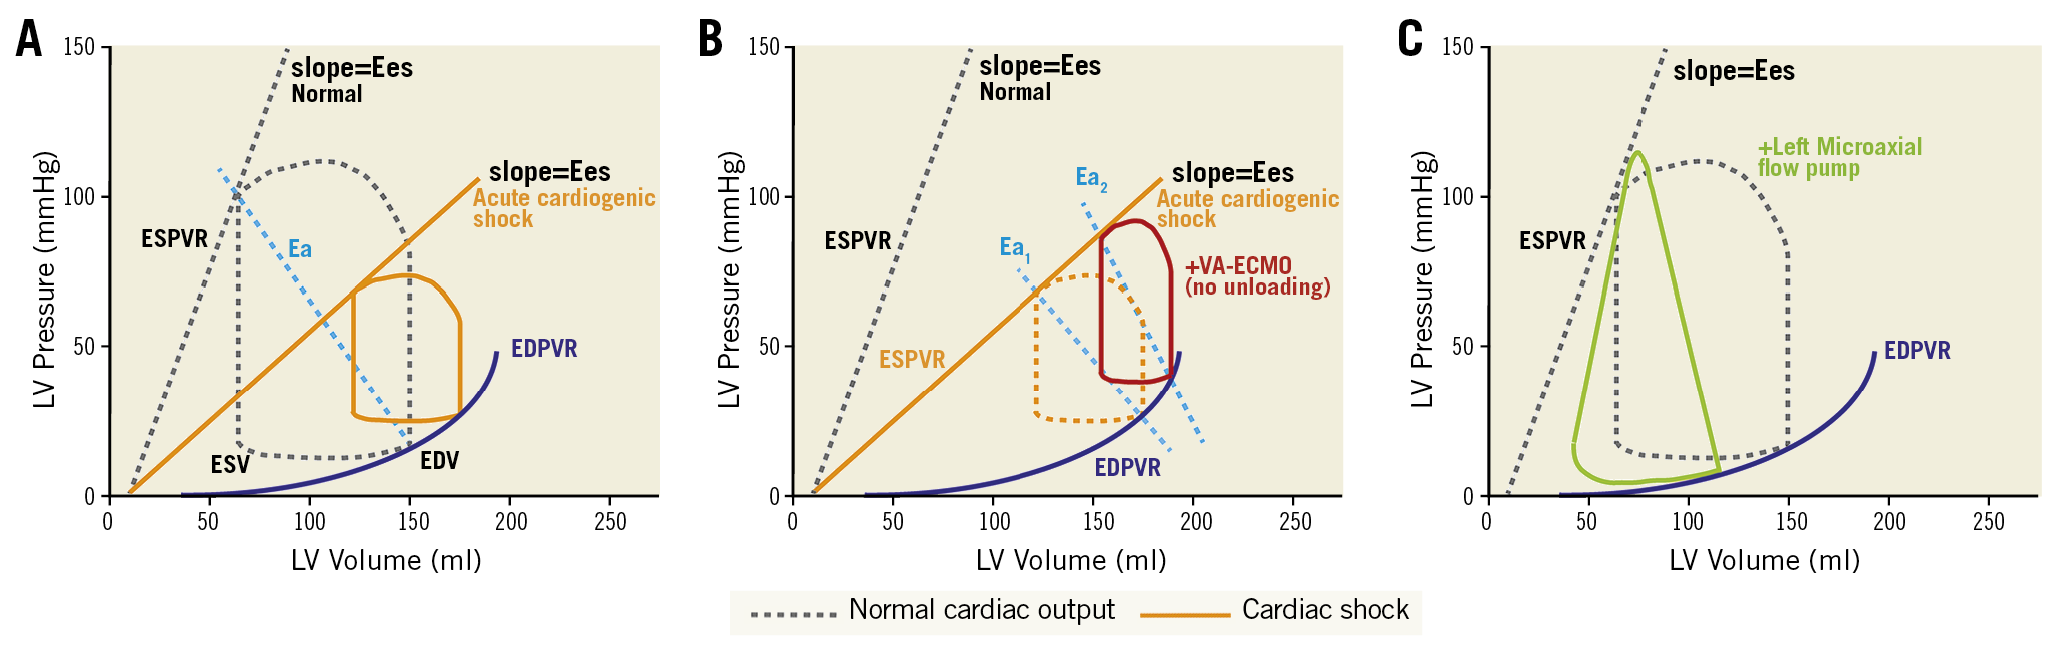 Figure 1. Pressure-volume loops. (A) Normal PV-loop and PV-loop in acute cardiogenic shock, the slope (Ees) shifts with changes in contractility. (B) PV-loop in VA-ECMO supported cardiogenic shock. PV-loop becomes narrower and is associated with an increase in EDPVR. (C) PV-loop in a left ventricular microaxial flow pump supported configuration, resulting in loss of normal isovolumetric periods, reduced EDPVR and conversion of the typical PV-loop to a triangular shape. Ea: arterial elastance; EDPVR: end-diastolic pressure-volume relationship; EDPVR: end-diastolic pressure-volume relationship; EDV: end-diastolic volume; Ees: end-systolic elastance; ESPVR: end-systolic pressure-volume relationship; ESV: end-systolic volume